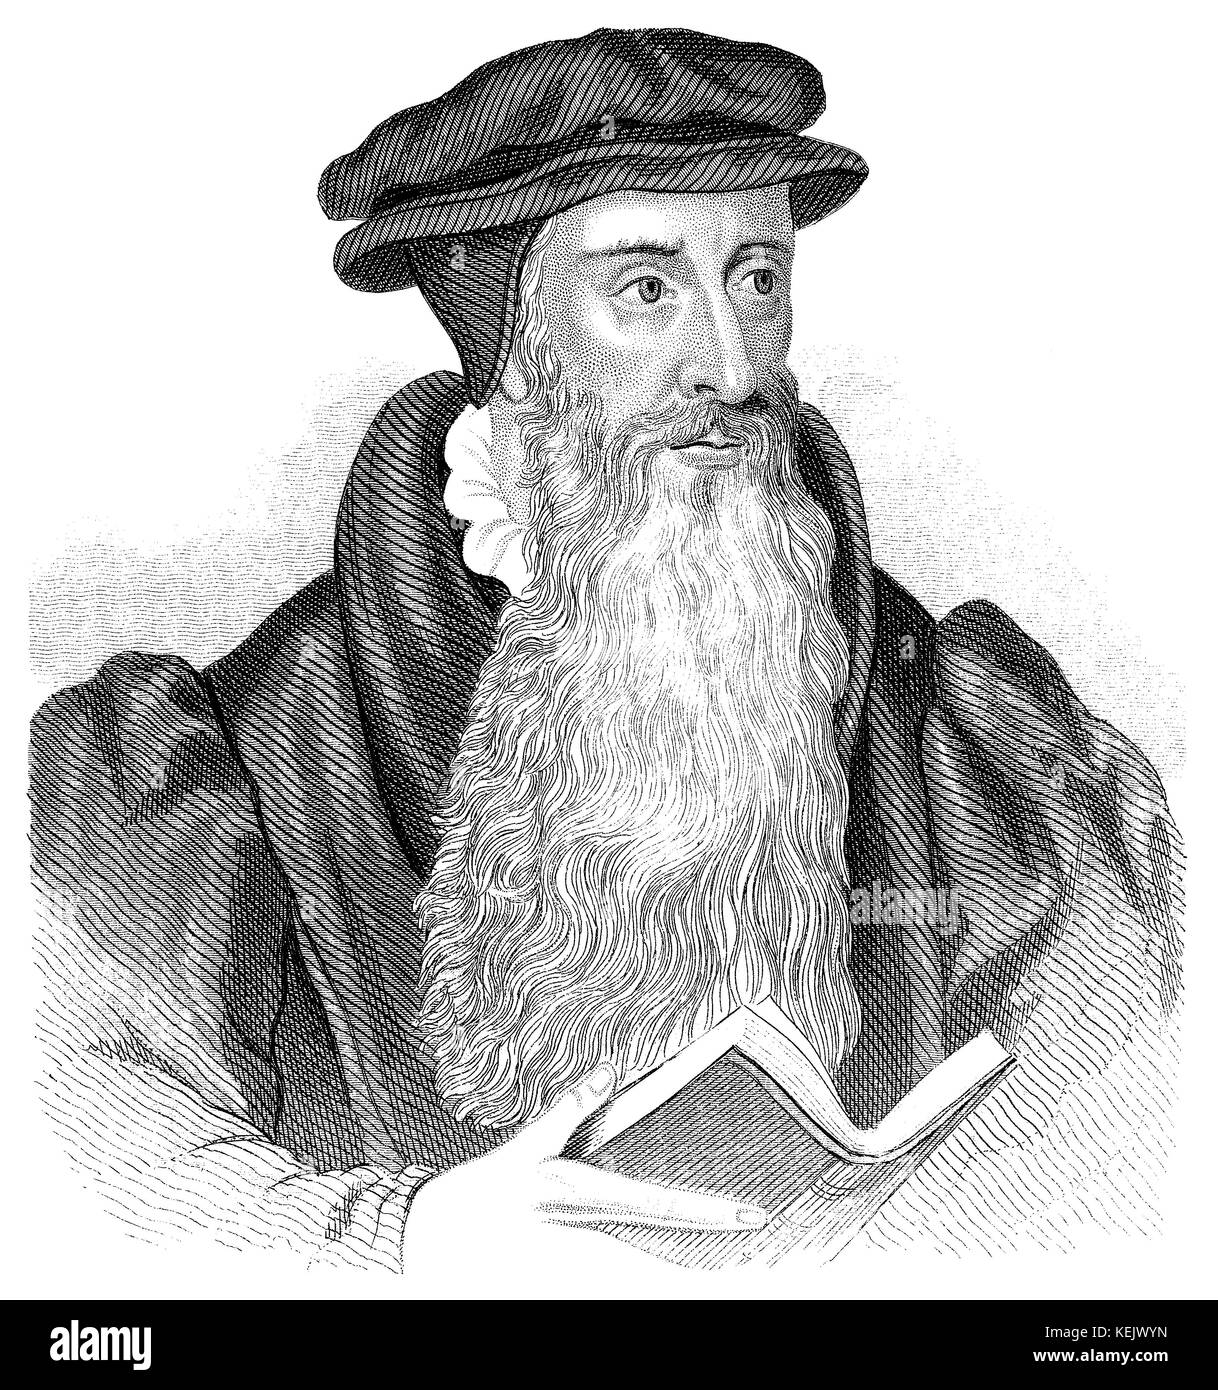 1853 engraving of the theologian, and founder of the Presbyterian Church of Scotland, John Knox. Stock Photo